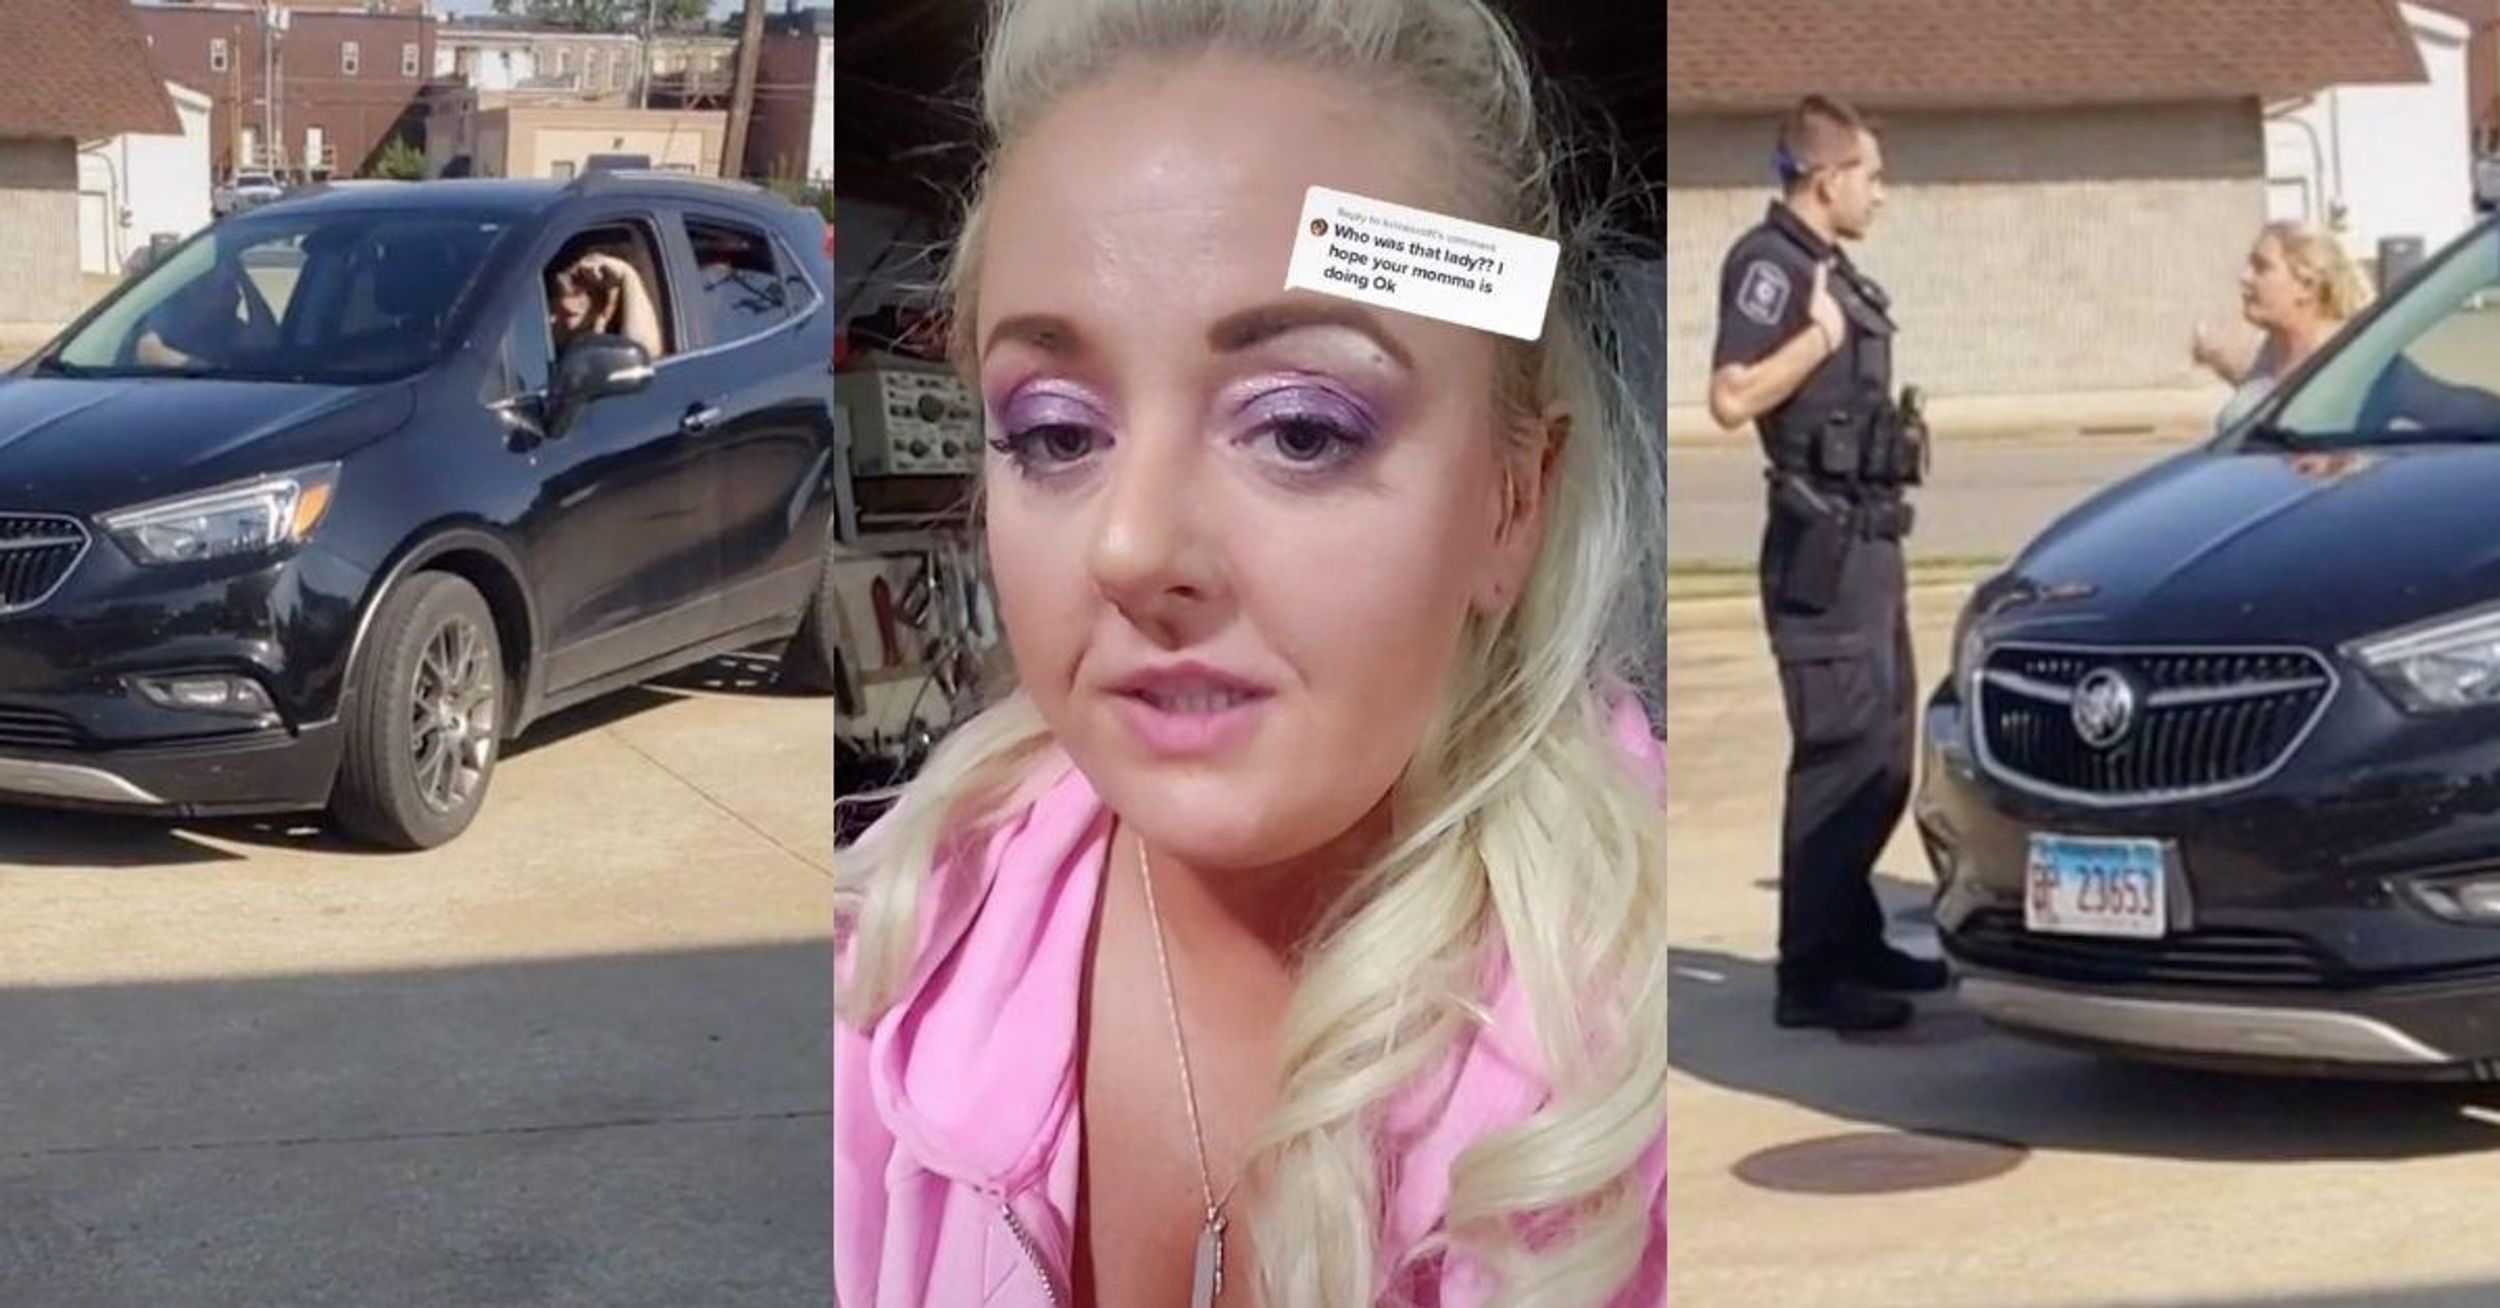 Woman Calls Cops On Driver And Blocks Her In Parking Lot After She Accidentally Ran A Red Light